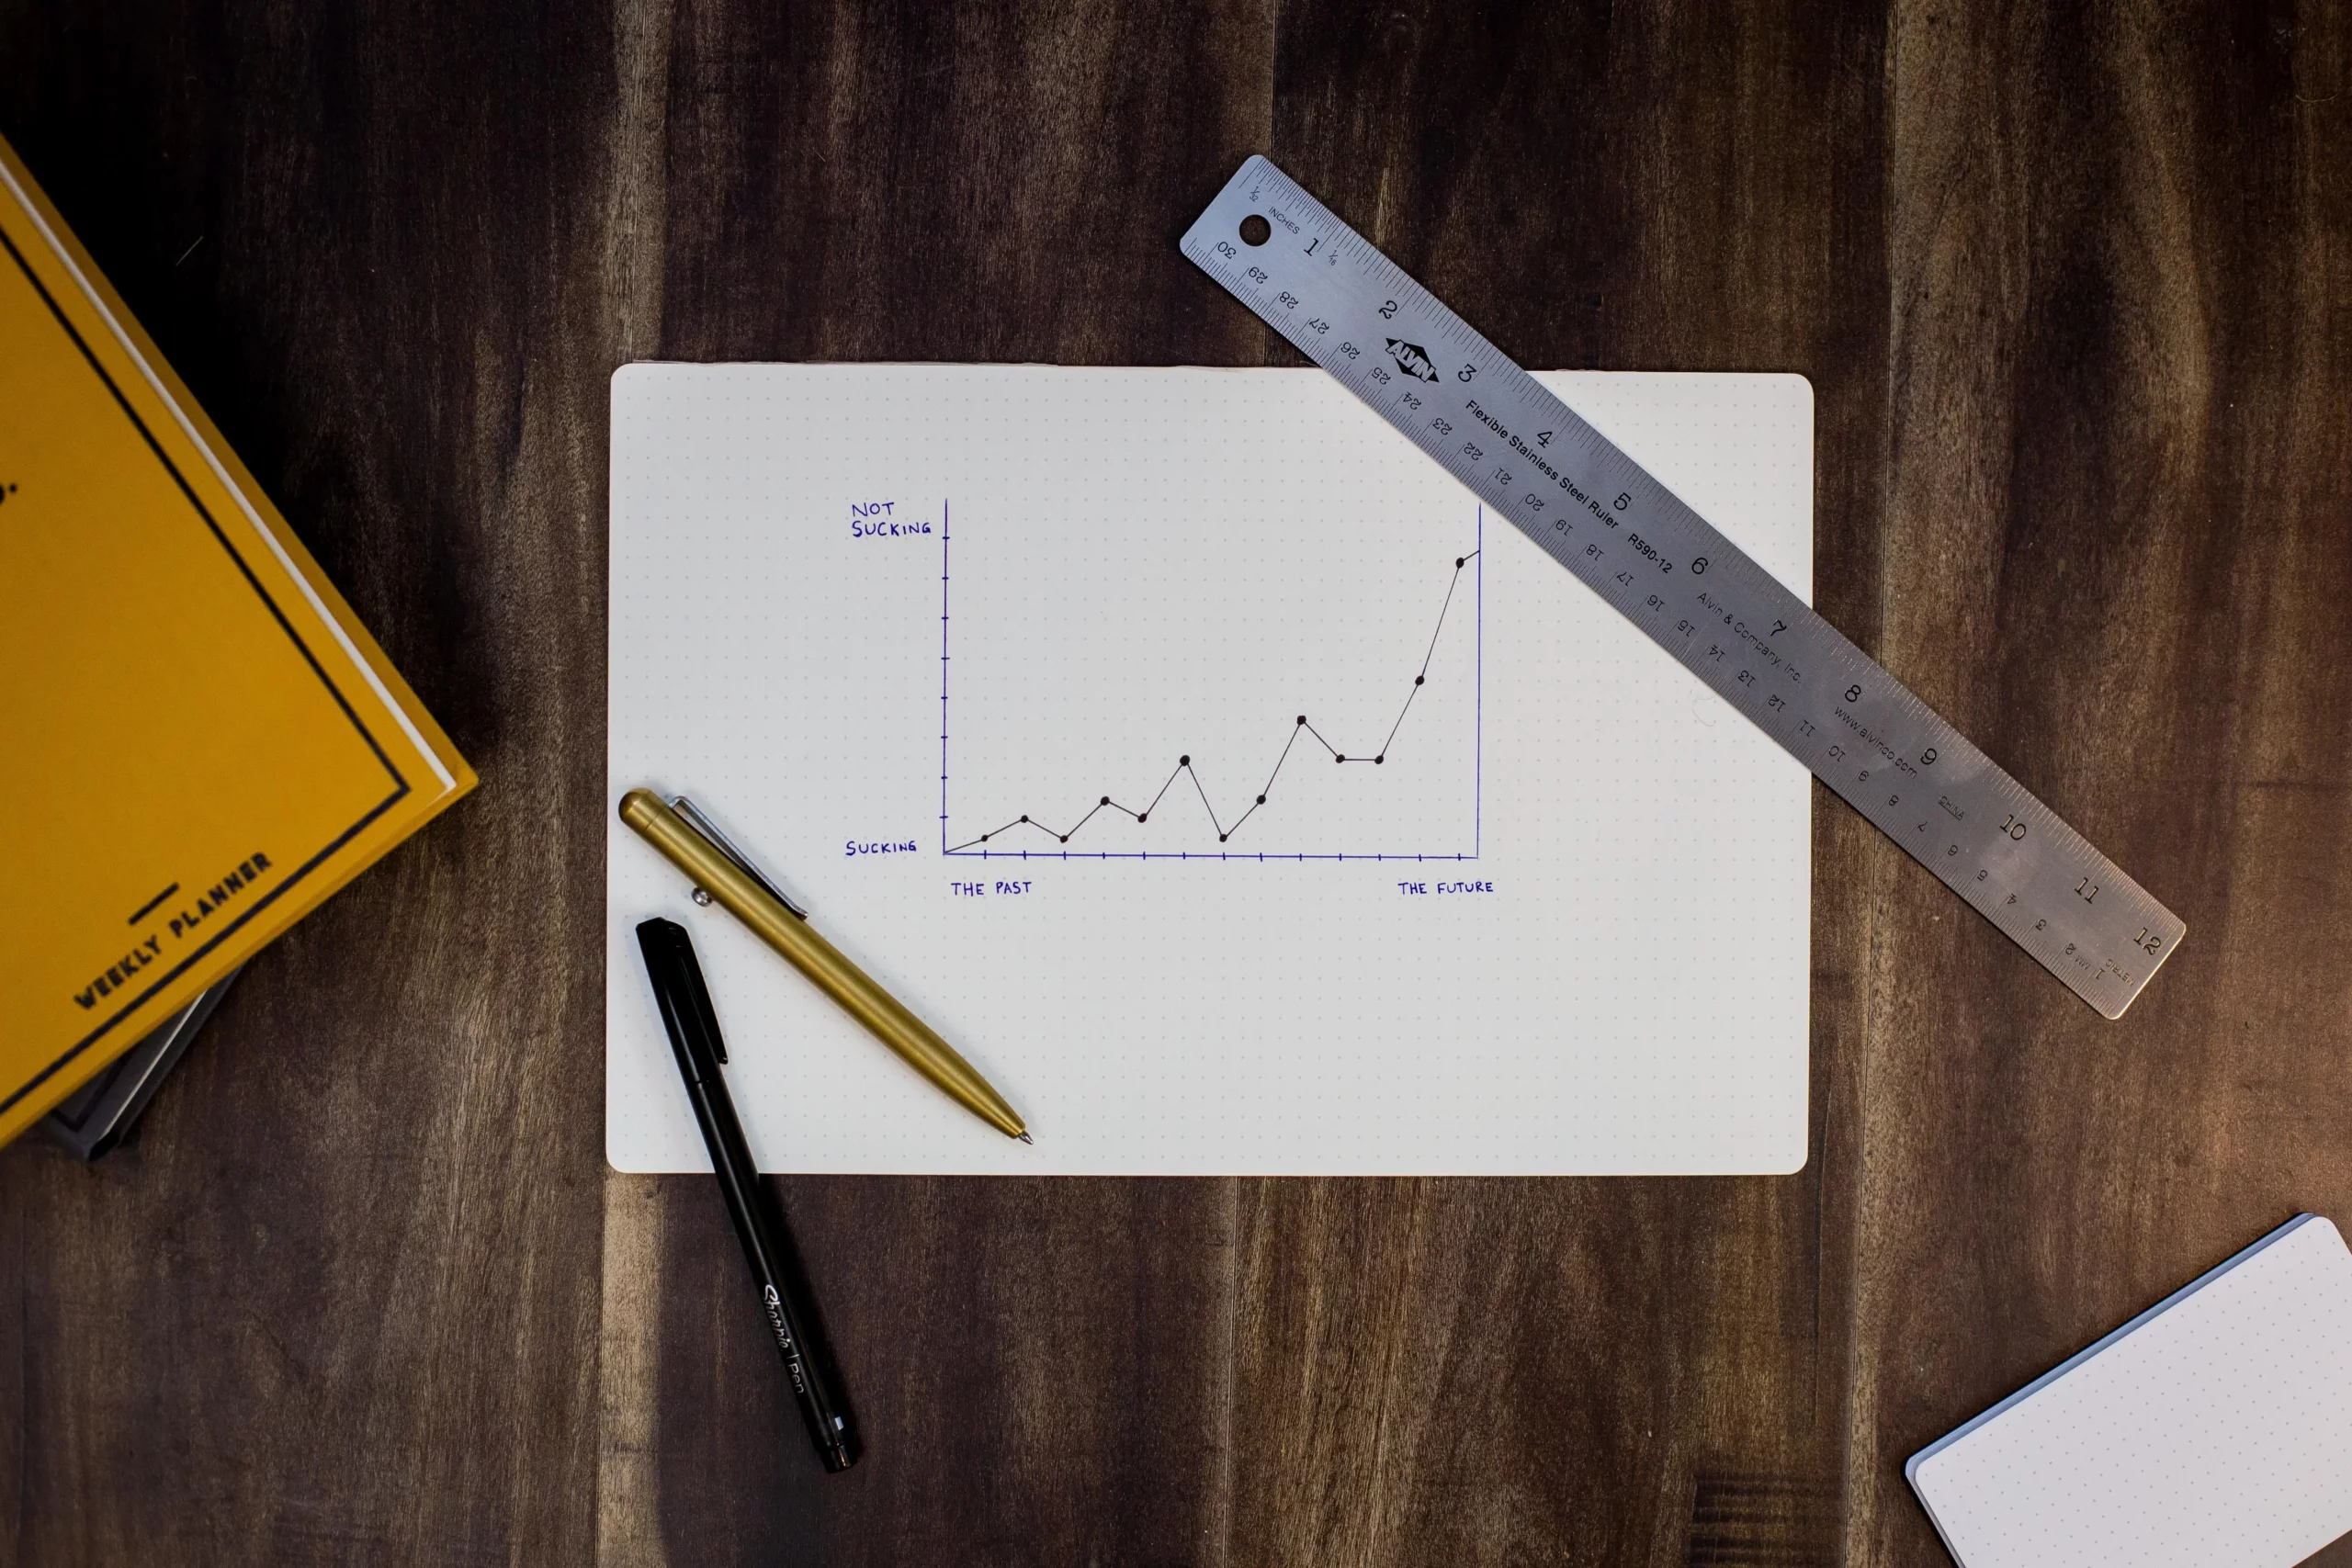 Photo by @isaacmsmith on Unsplash. Paper with pens, ruler depicting sales tracking.